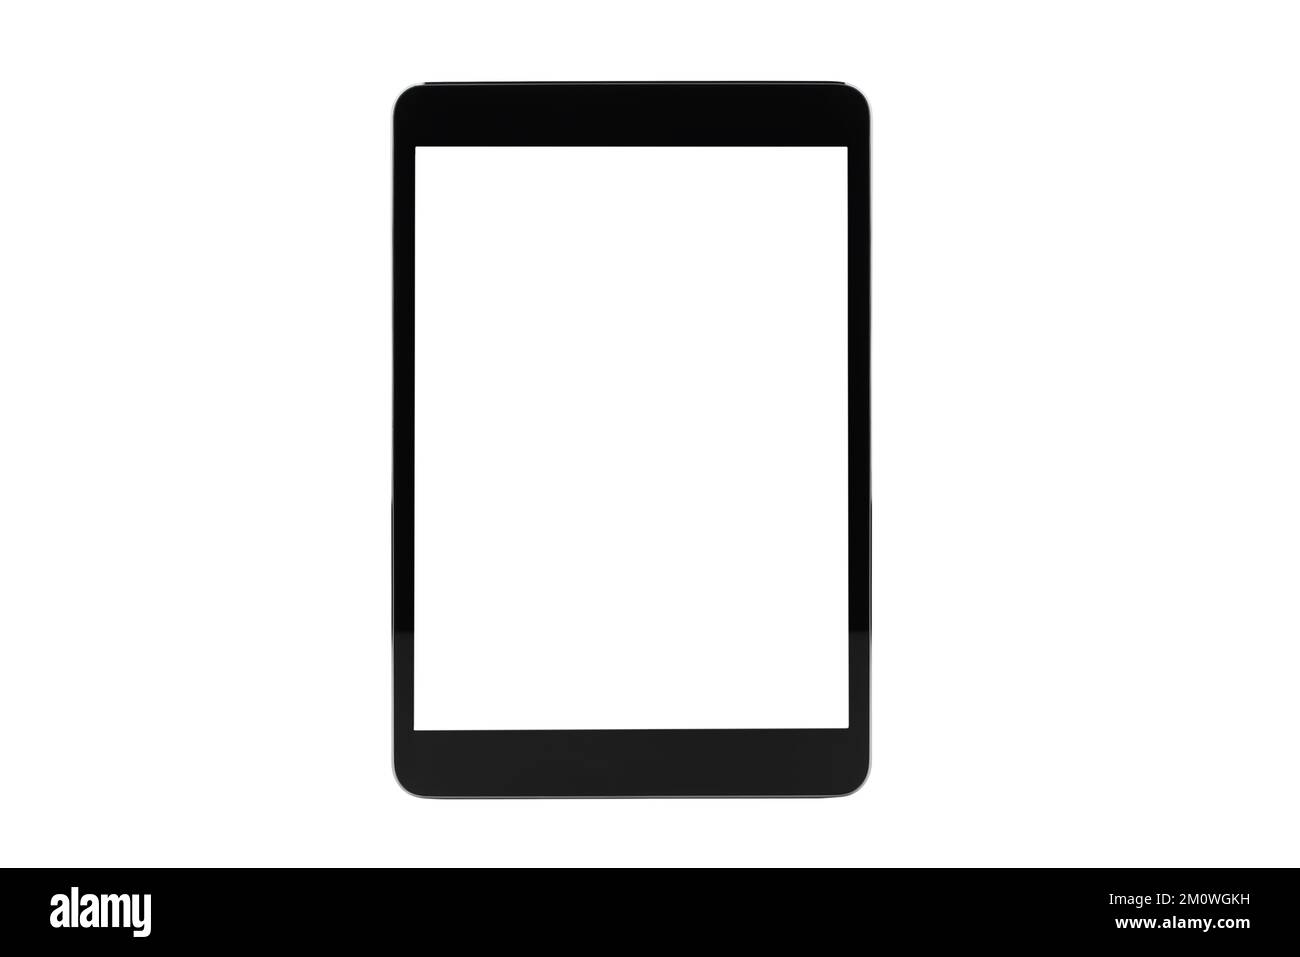 Digital Tablet isolated Mockup white background, New Modern Black Frameless Tablet Blank With a White Screen Based on a high-quality Studio Shot Stock Photo